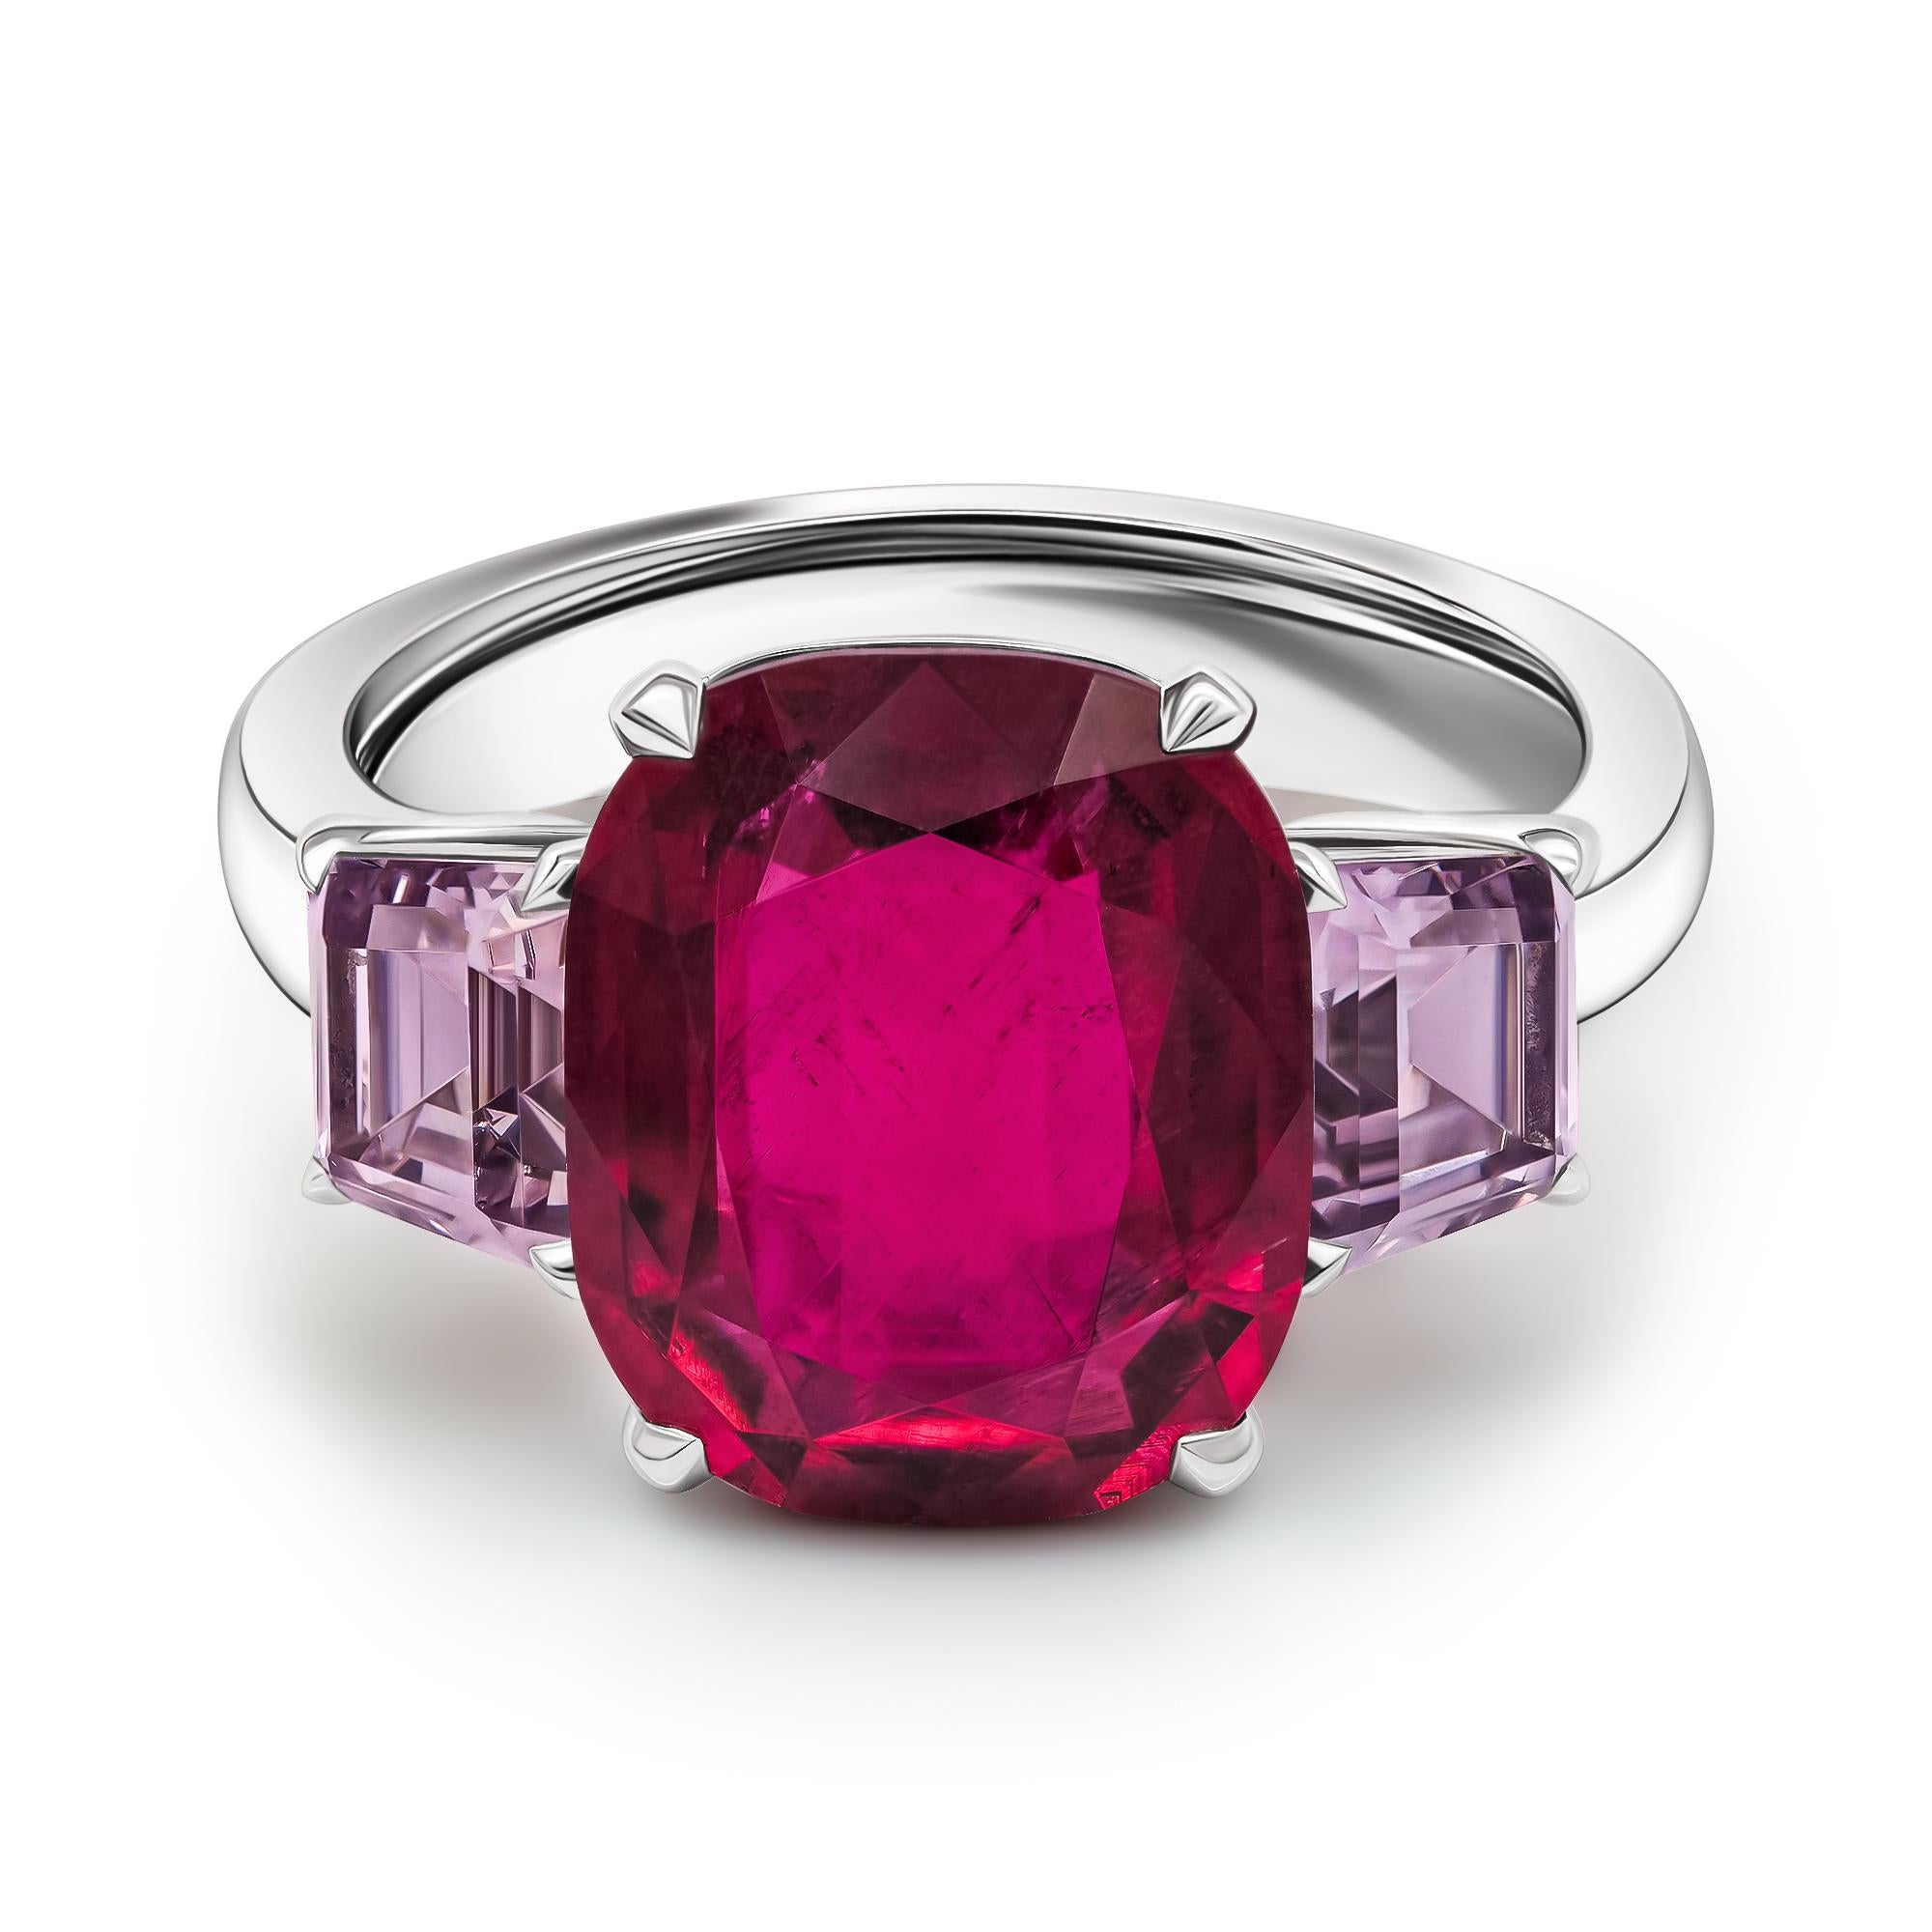 •	18K White gold.  
•	Ruby red Rubellite in cushion cut – total carat weight 4.06. 
•	Spinels – 2 pc in trapezium cut, total carat weight 1.20.
•	Product weight - 5.30 grams.
•	Ring size – 5.5’.
